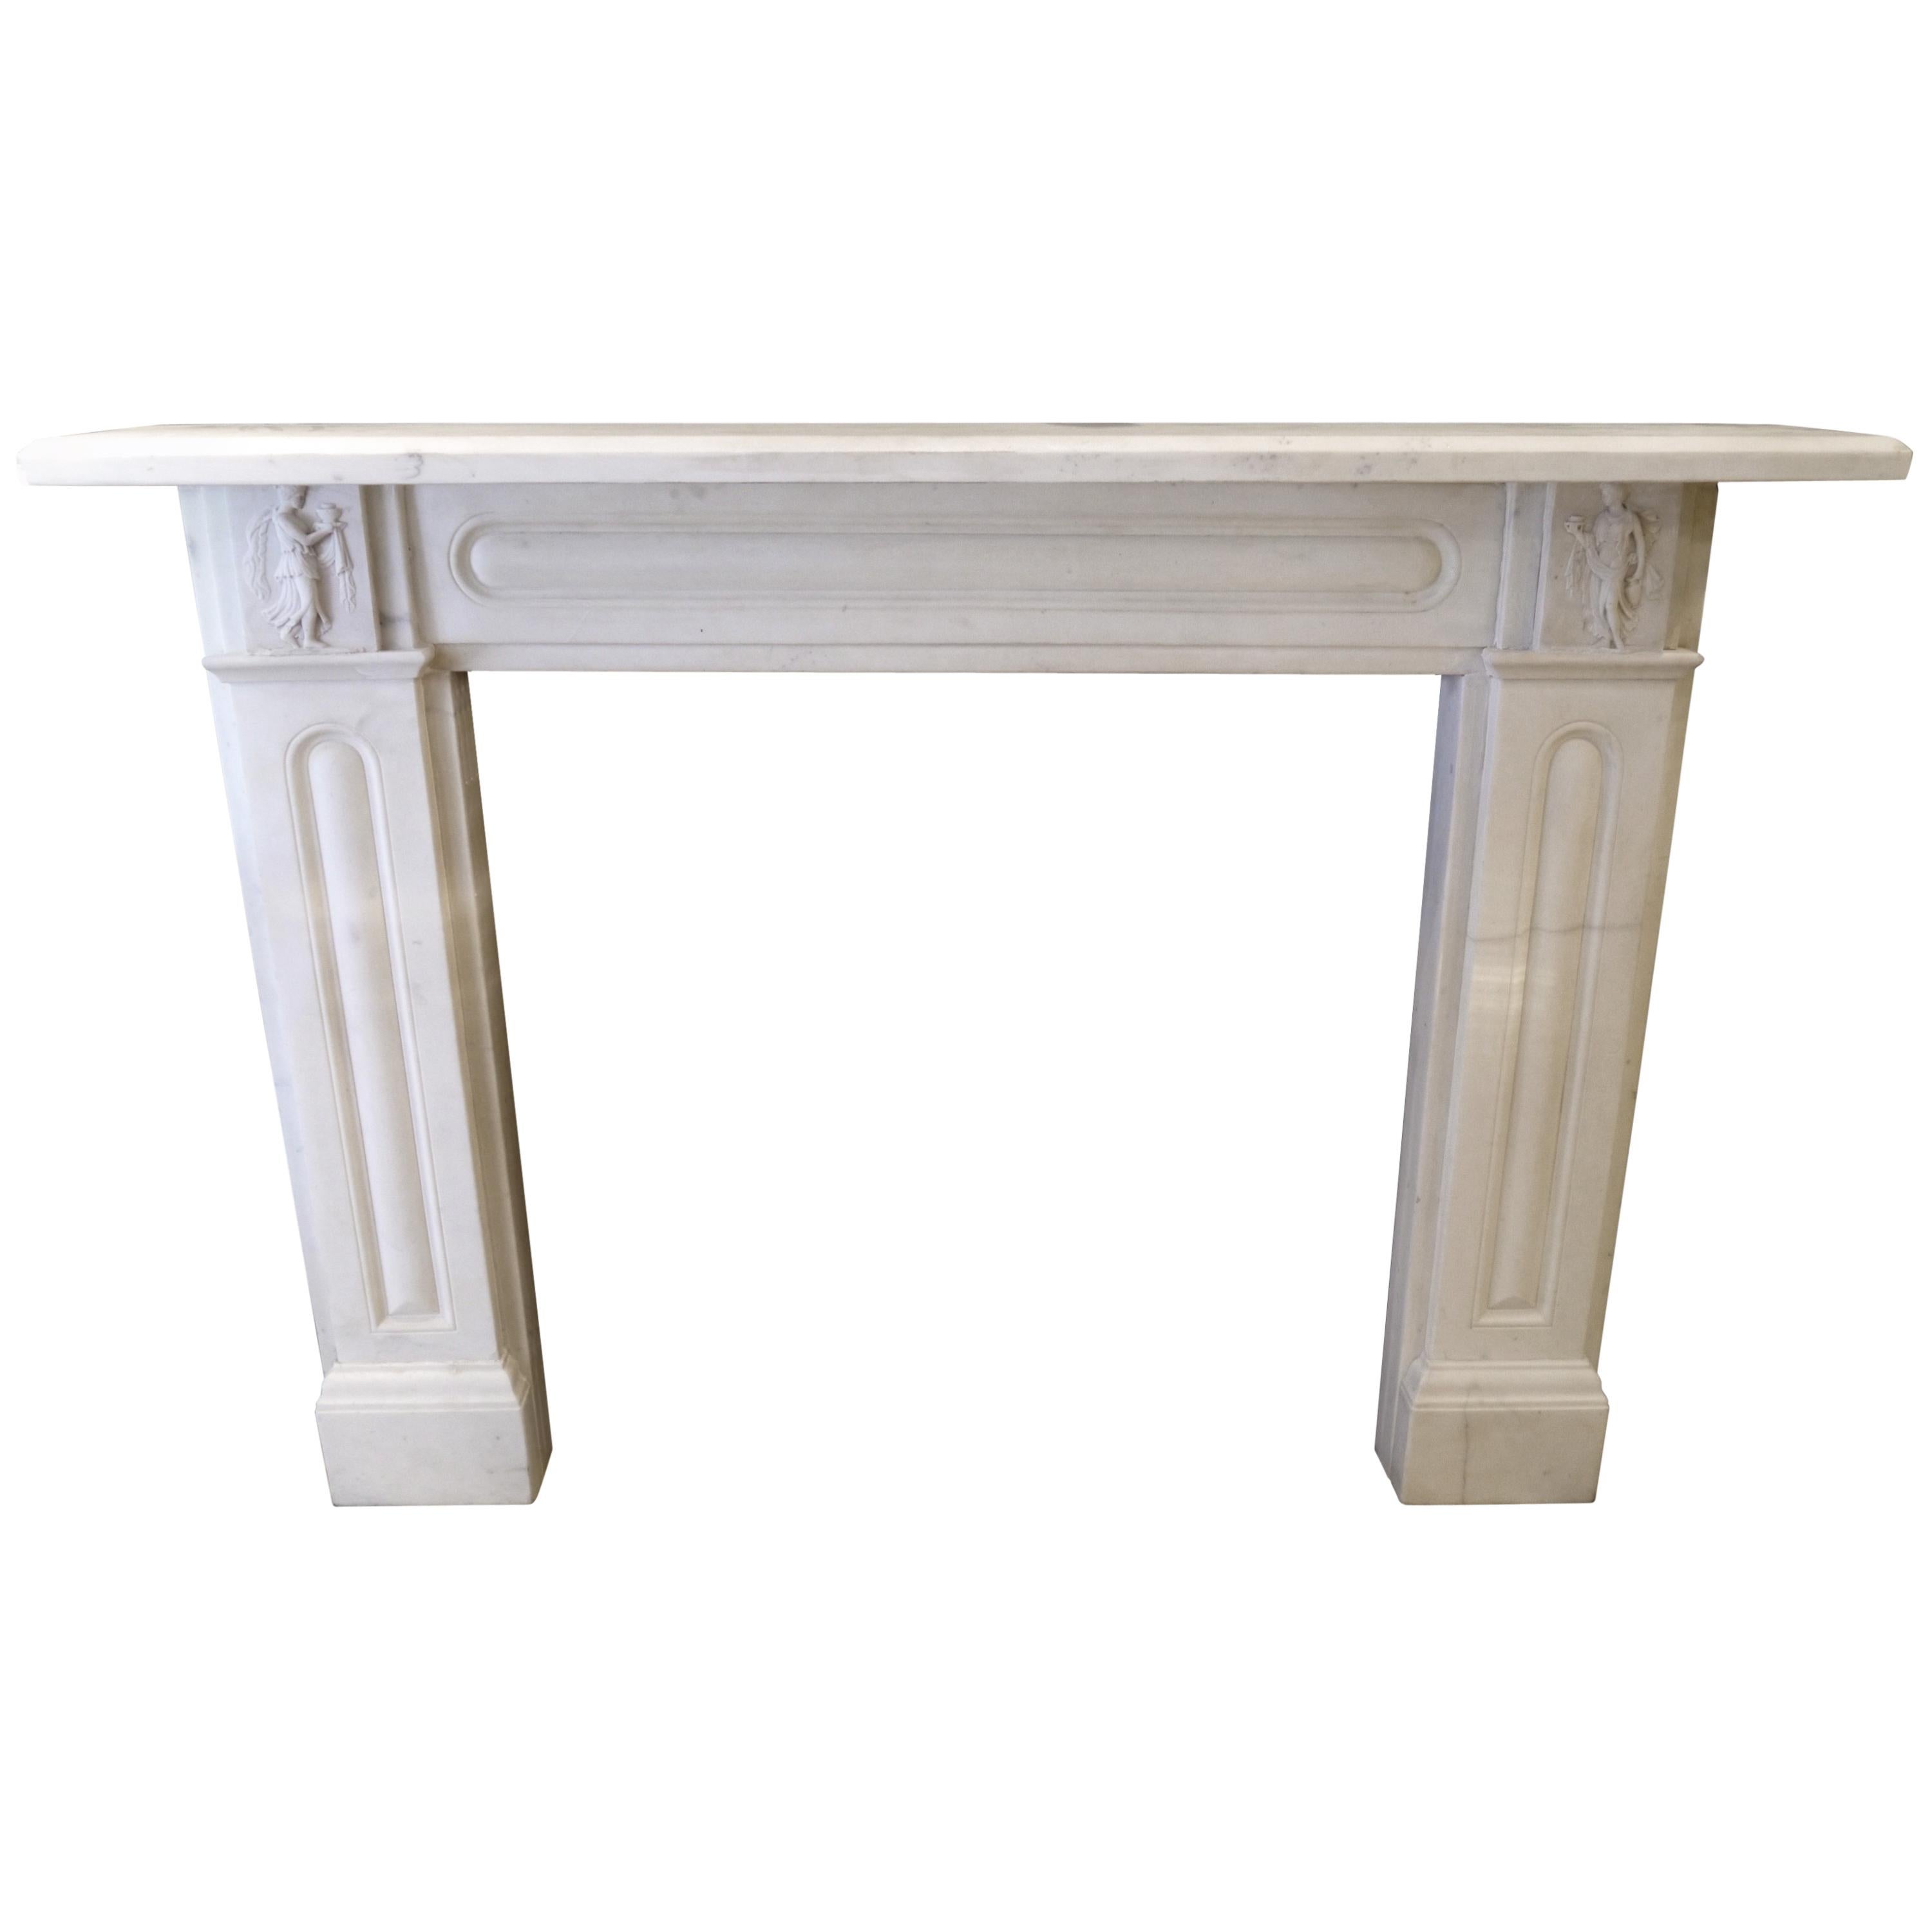 19th Century Statuary White Regency Marble Mantelpiece Fireplace For Sale